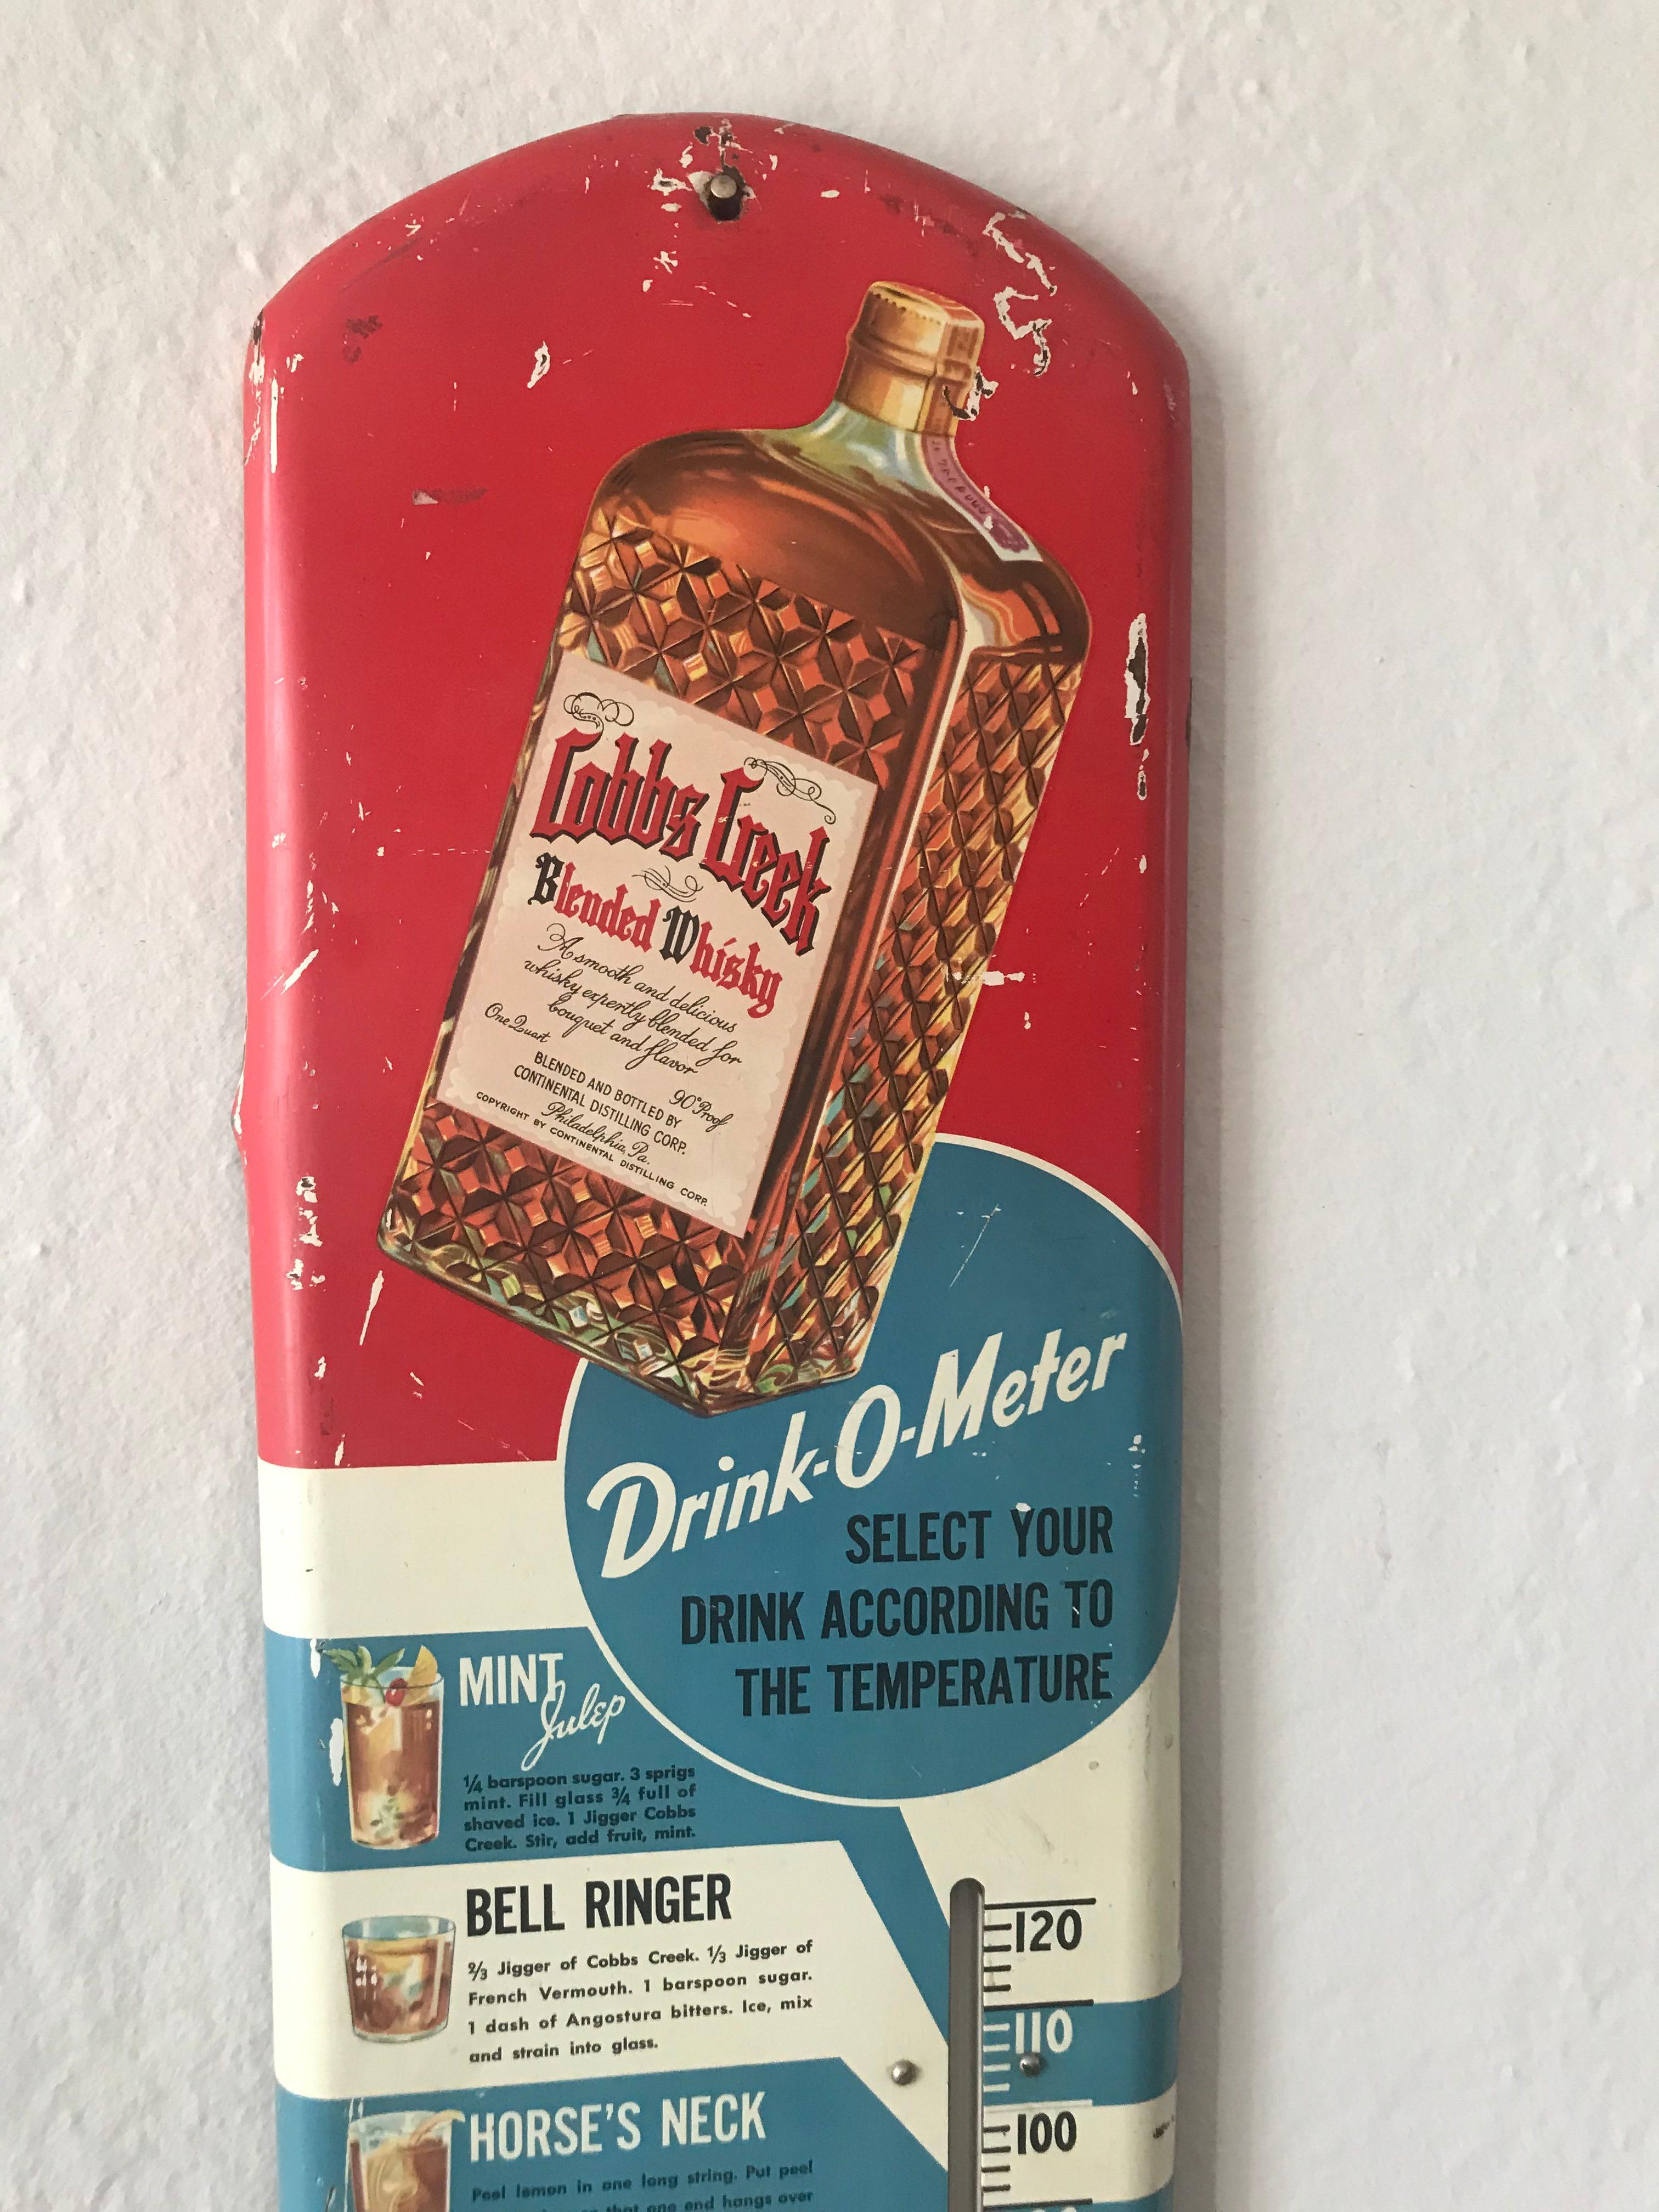 Vintage 1936 Cobbs Creek Blended Whisky metal advertising thermometer/sign. Whiskey was made by the Continental Distilling Corporation in Philadelphia, Pennsylvania. 